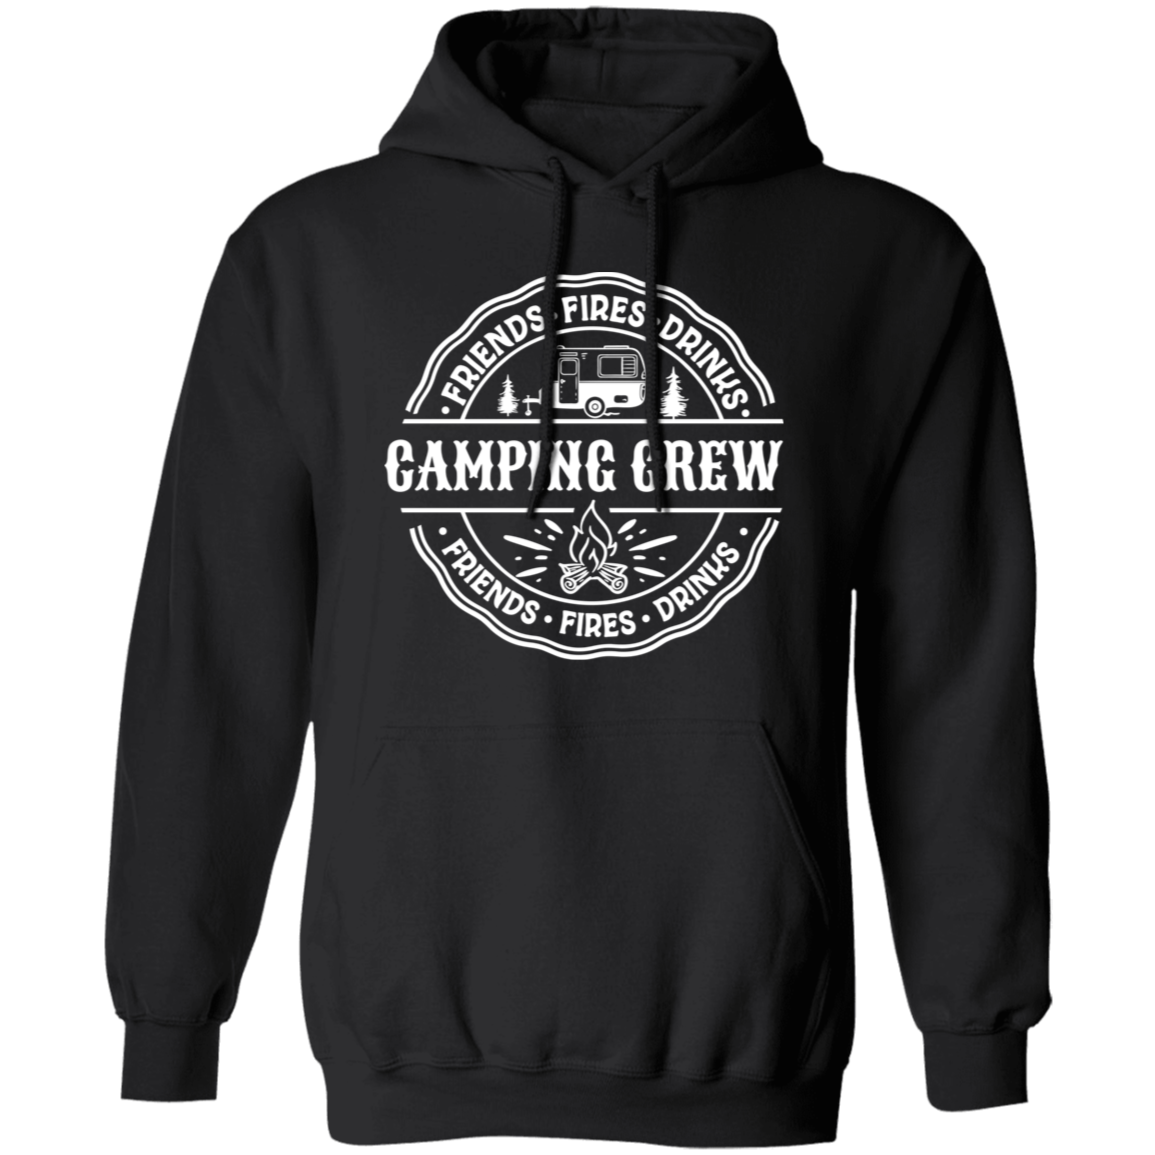 Camping Crew W G185 Pullover Hoodie